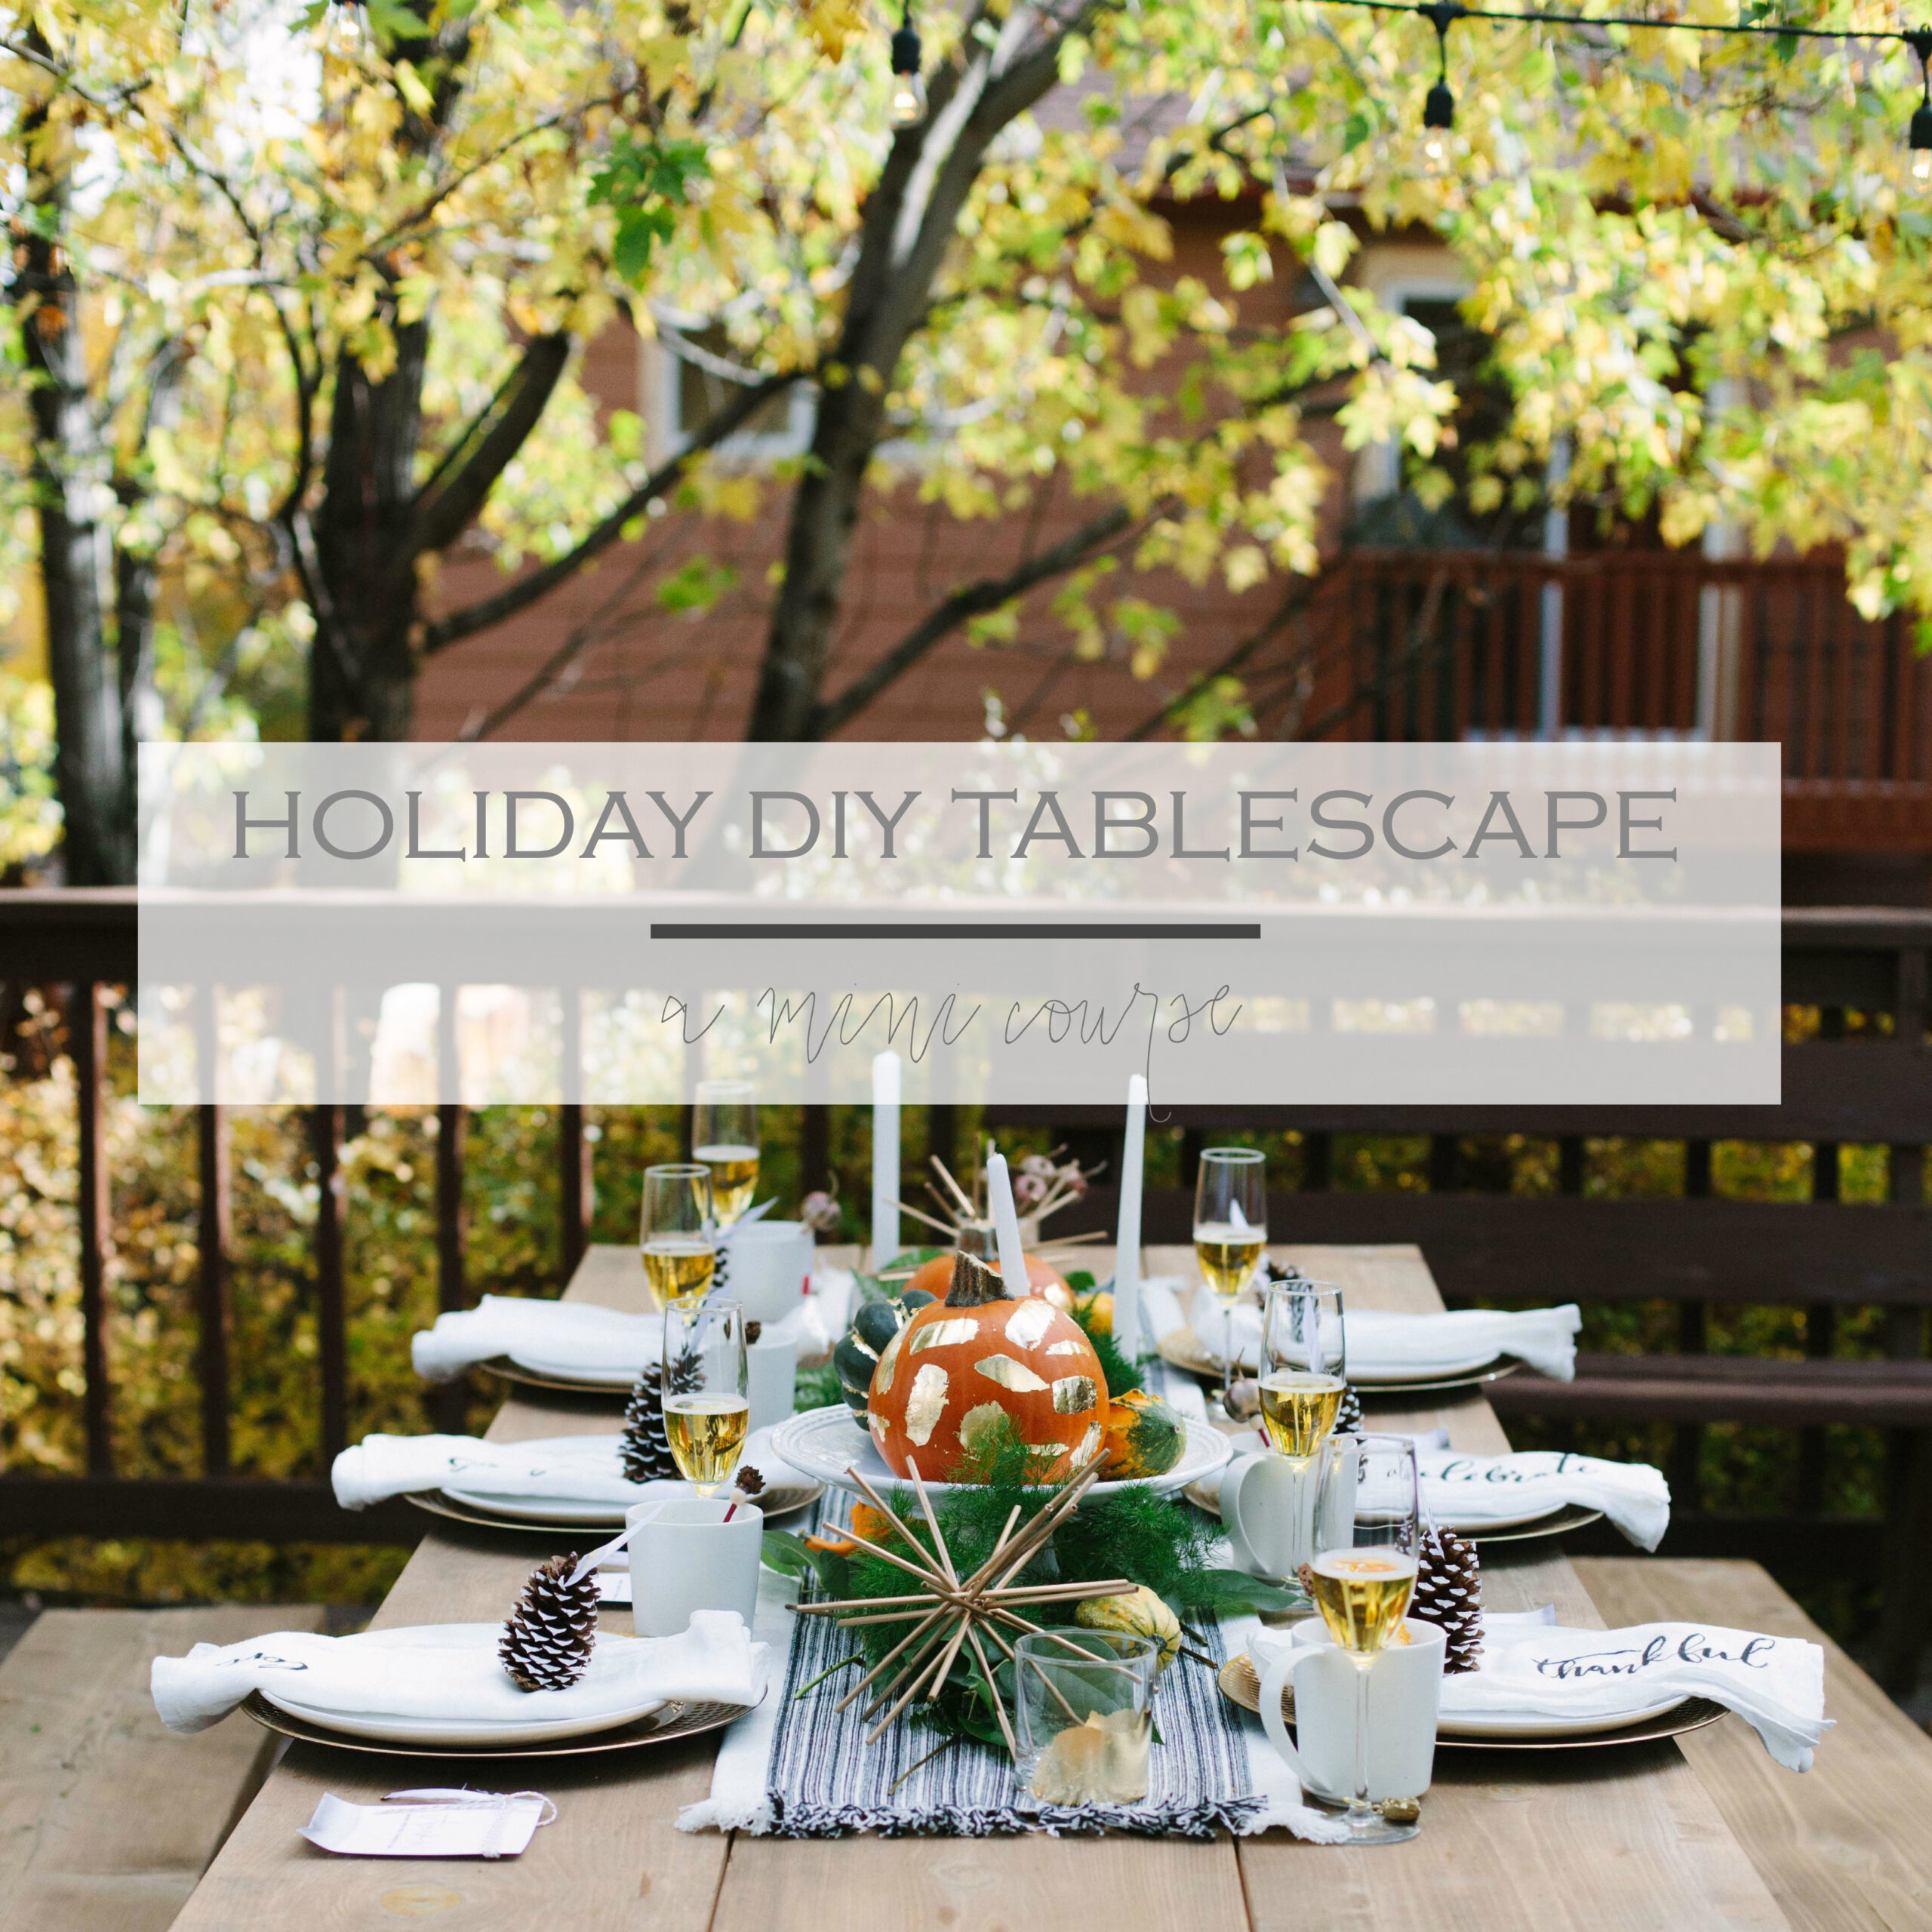 Holiday DIY Tablescapes | INSTANTLY available course just opened